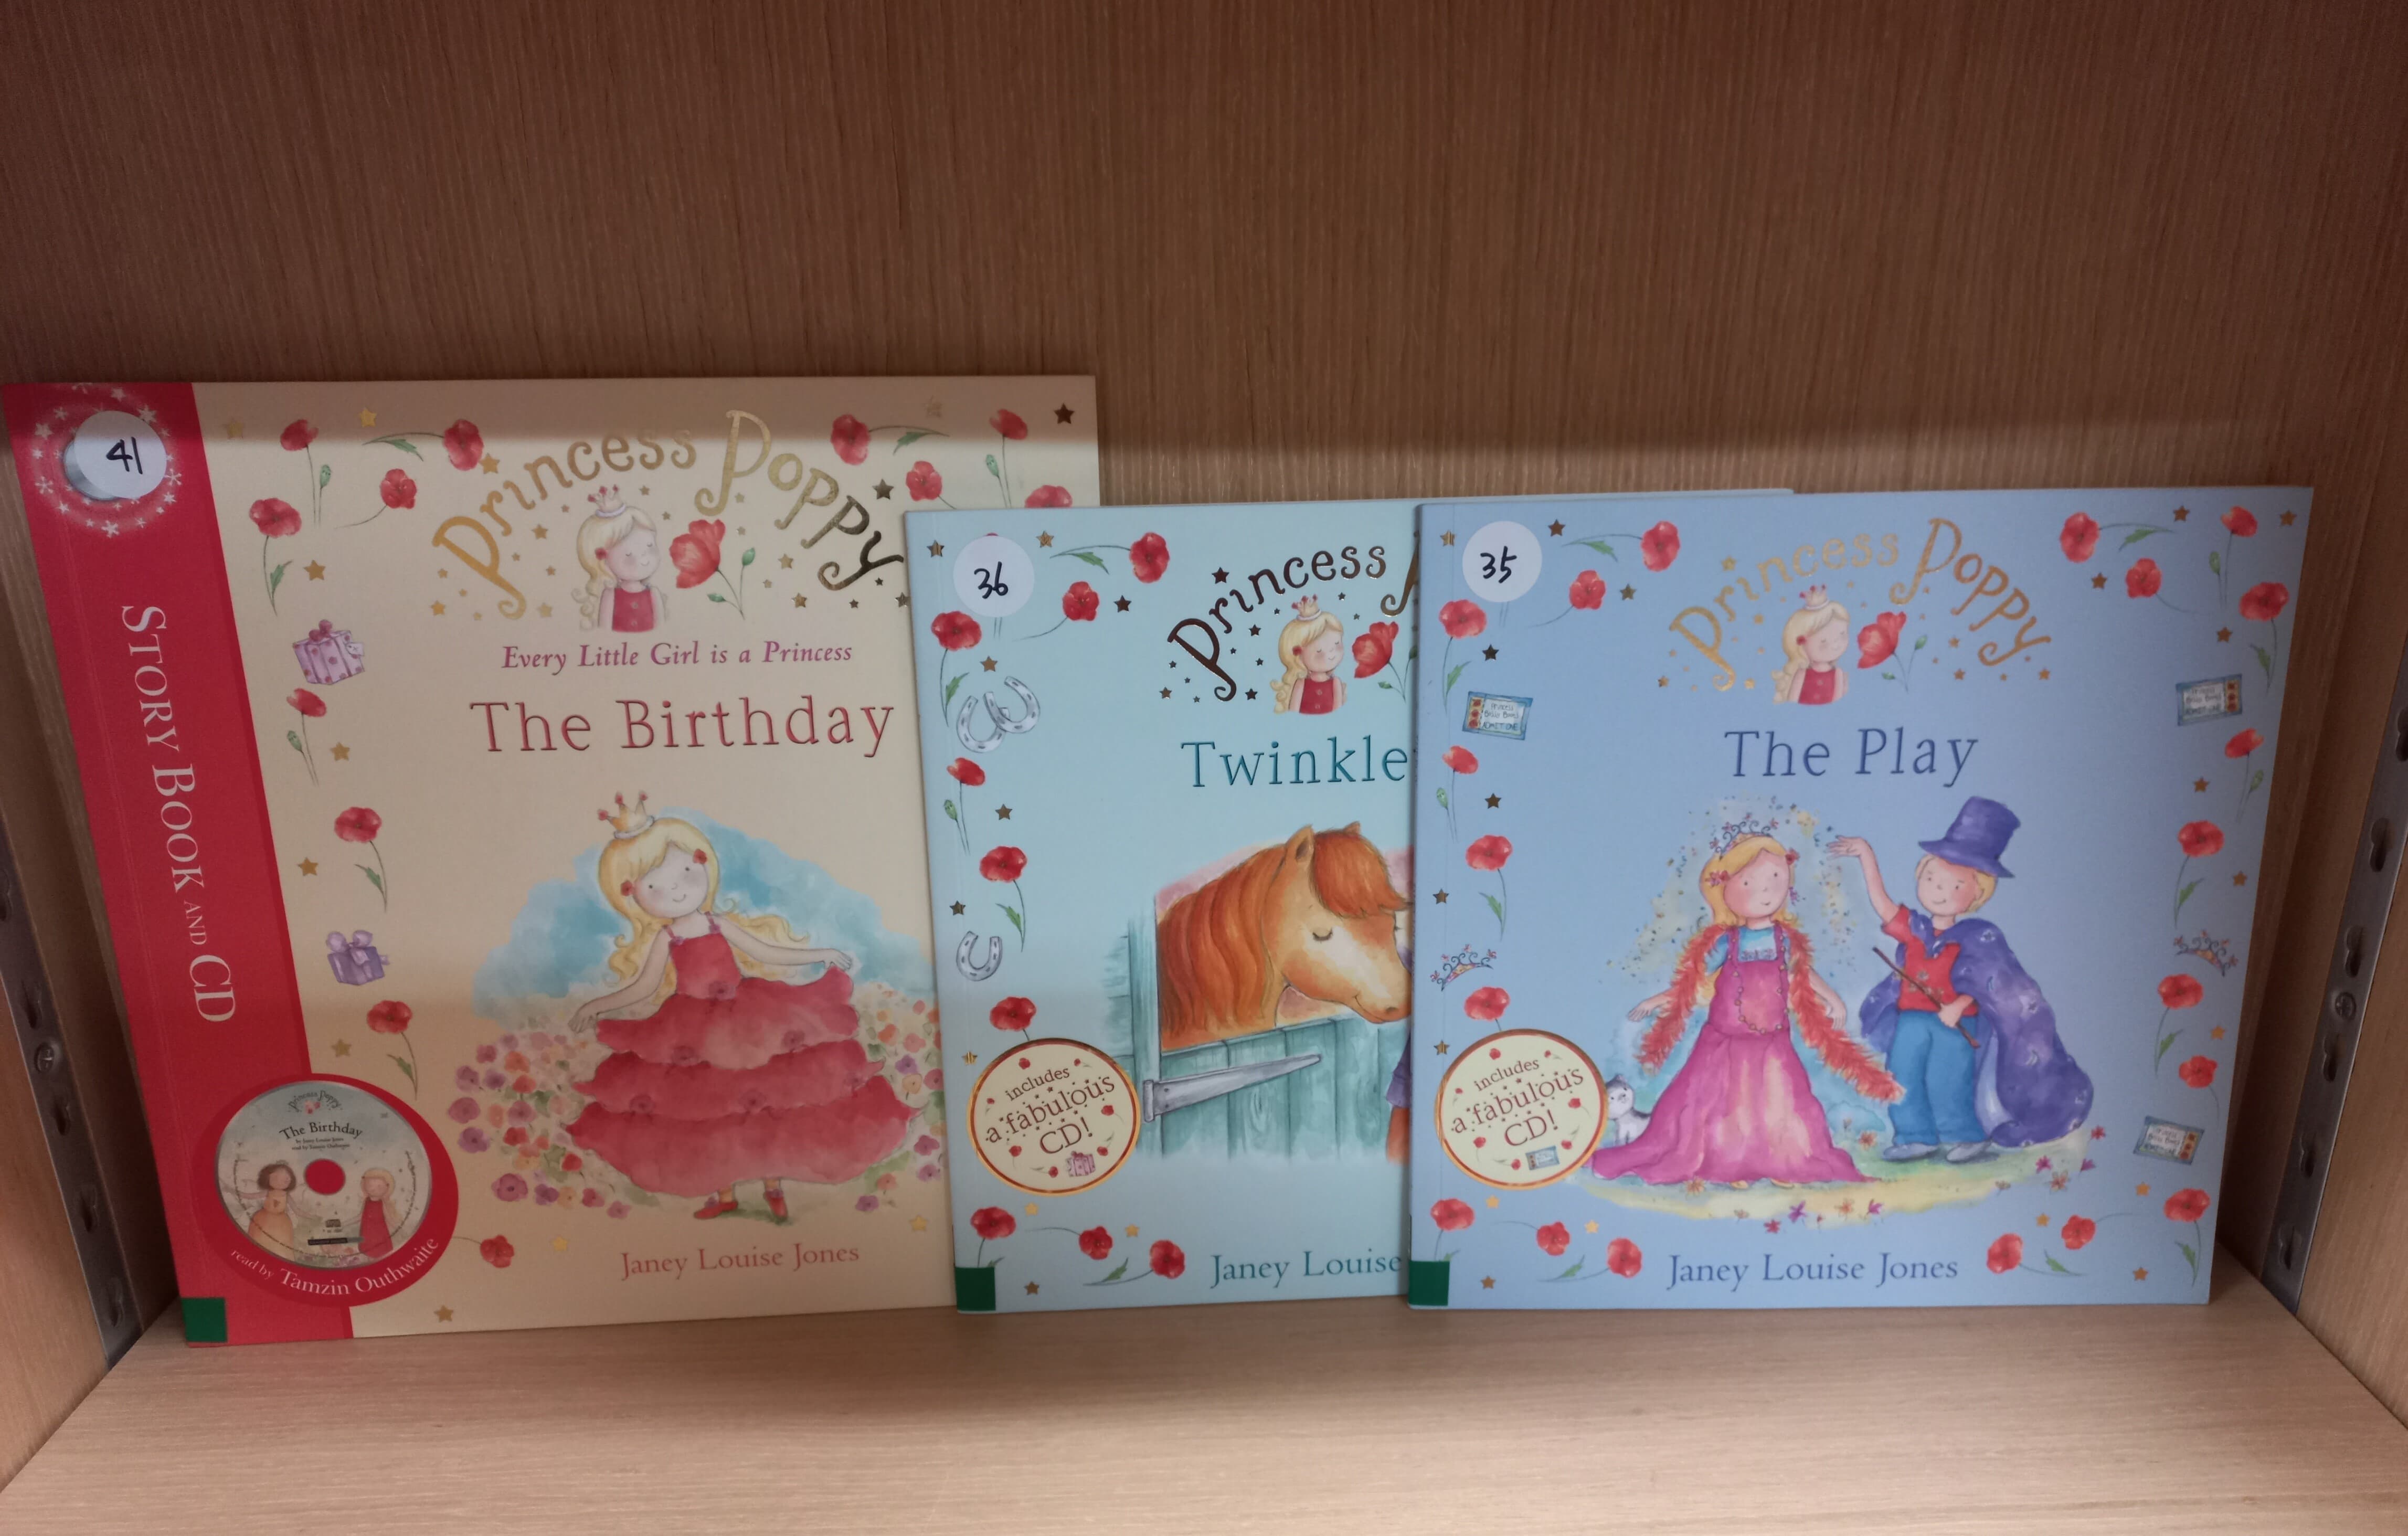 princess poppy 6권(book+cd)세트 (The Birthday, Twinkletoes,babyby twins,the play,fair day ball 등)